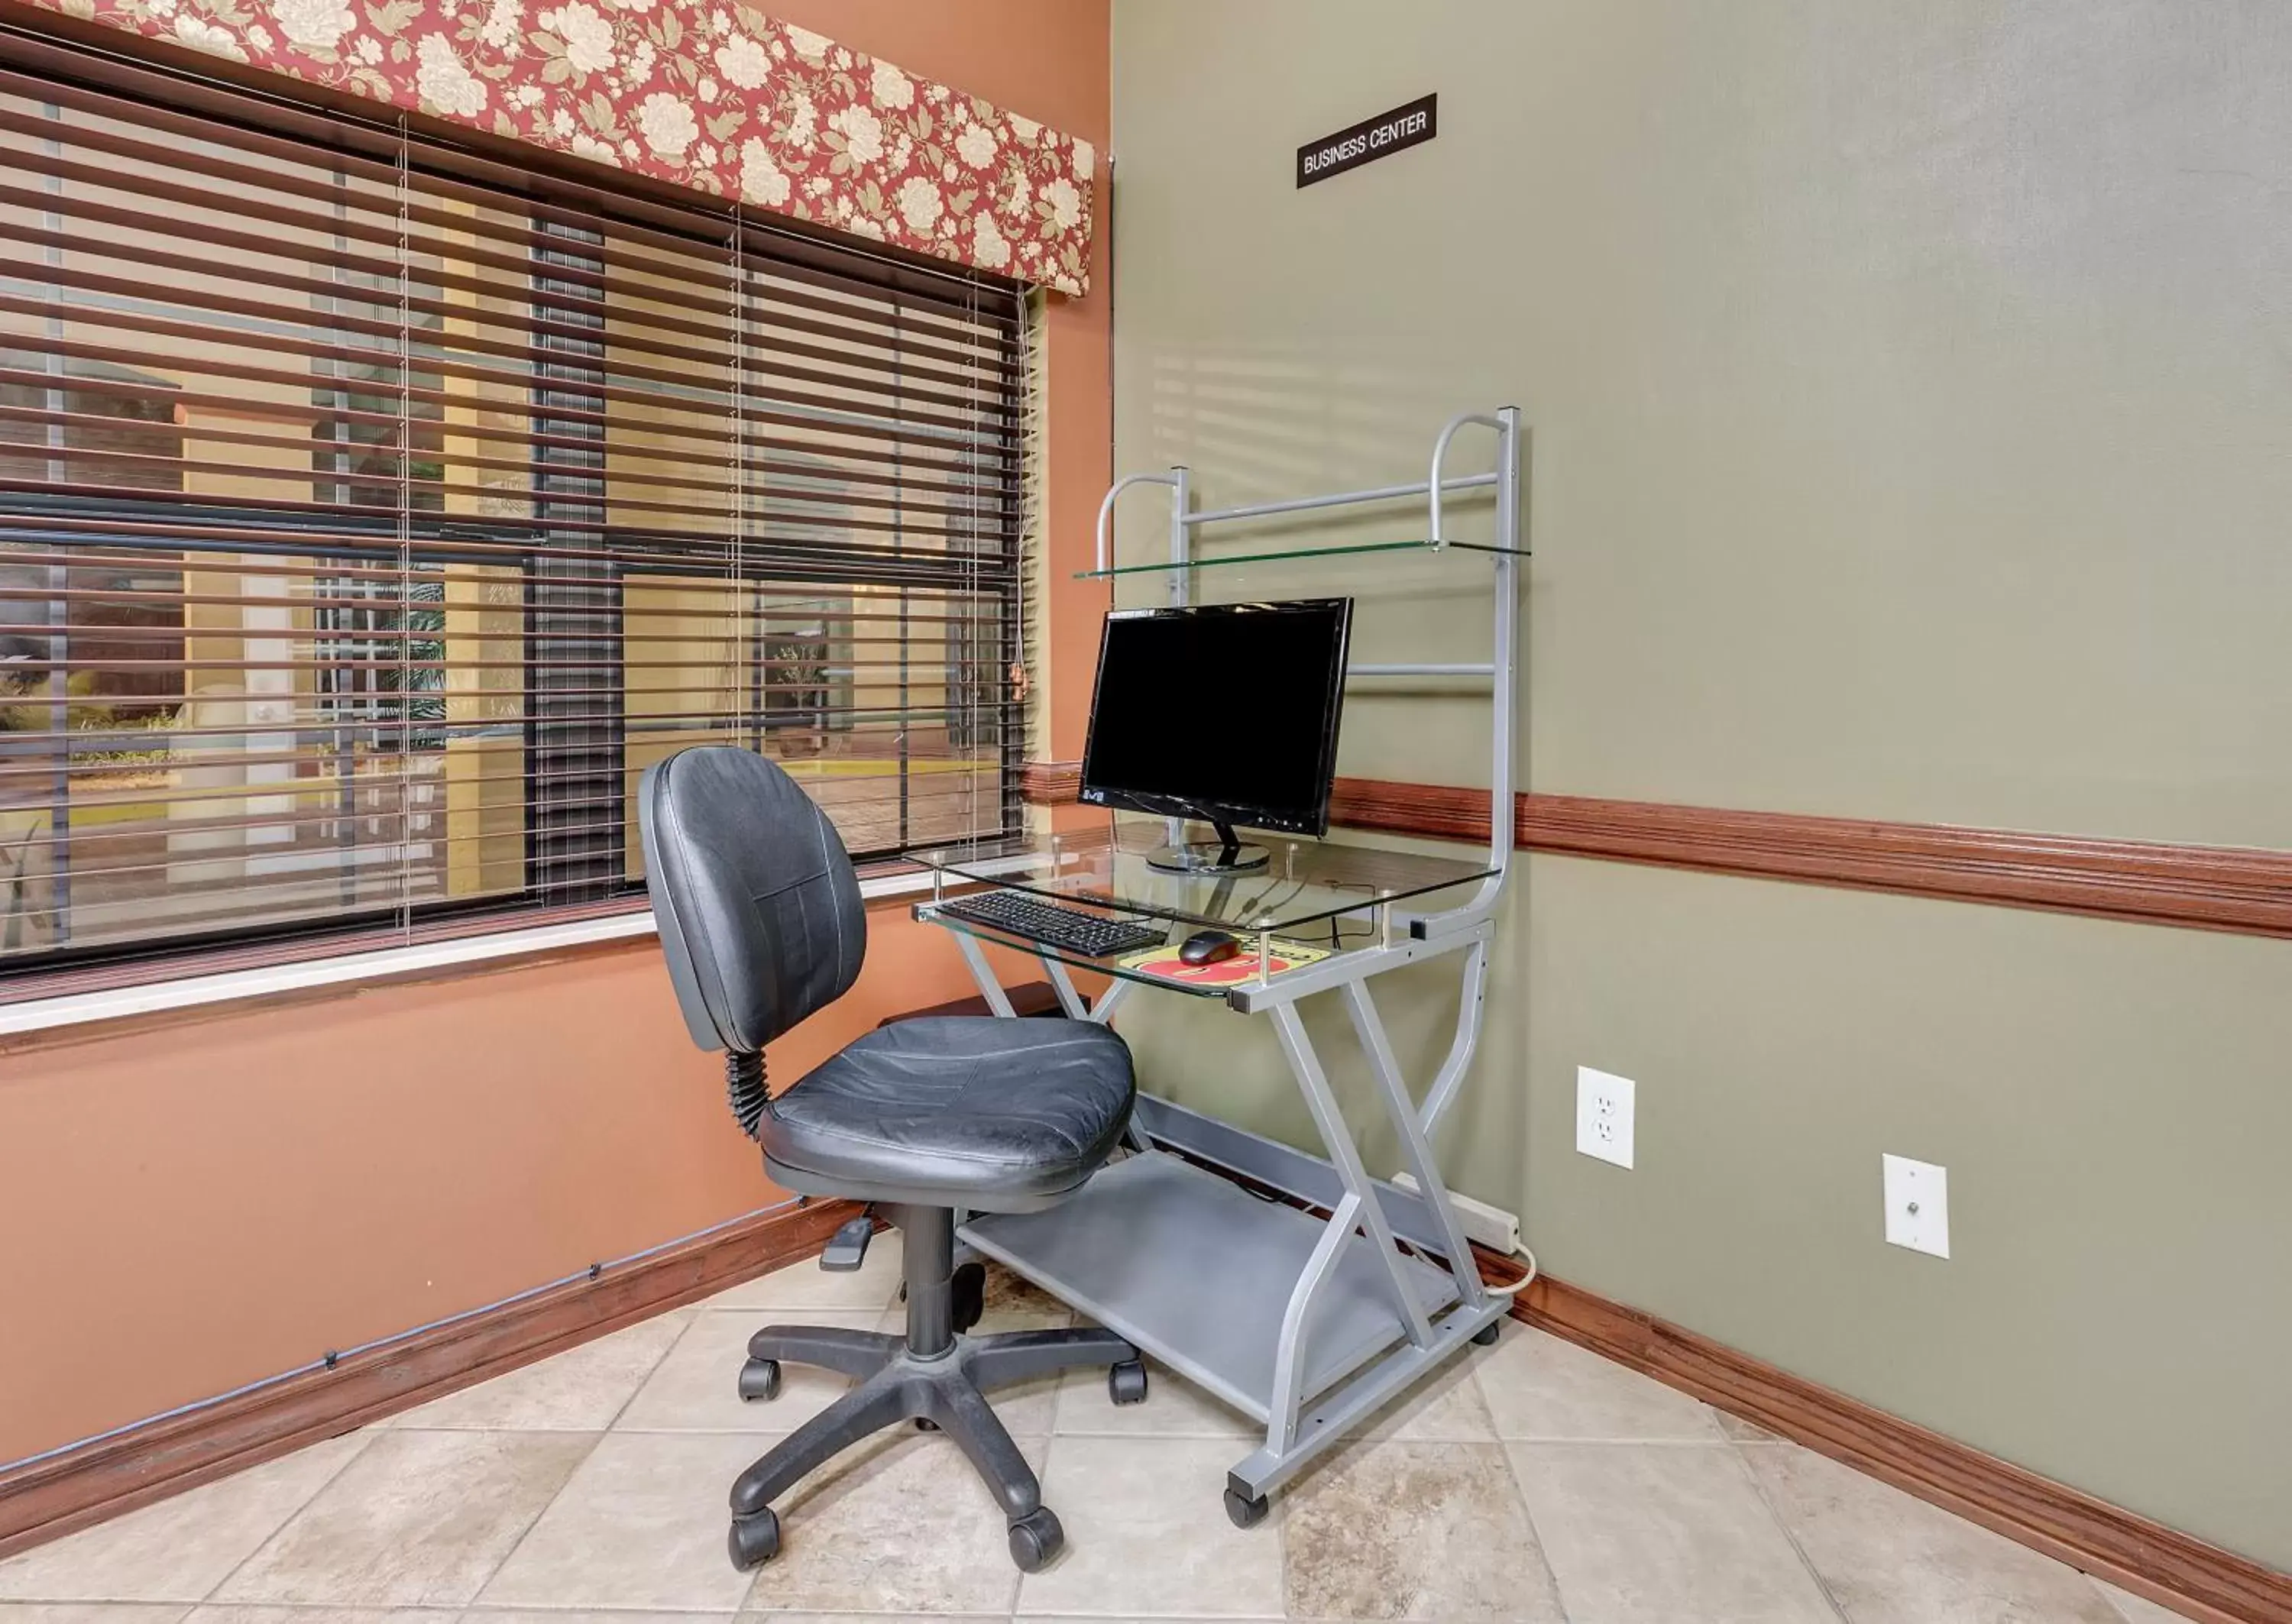 Business facilities in Super 8 by Wyndham Weslaco